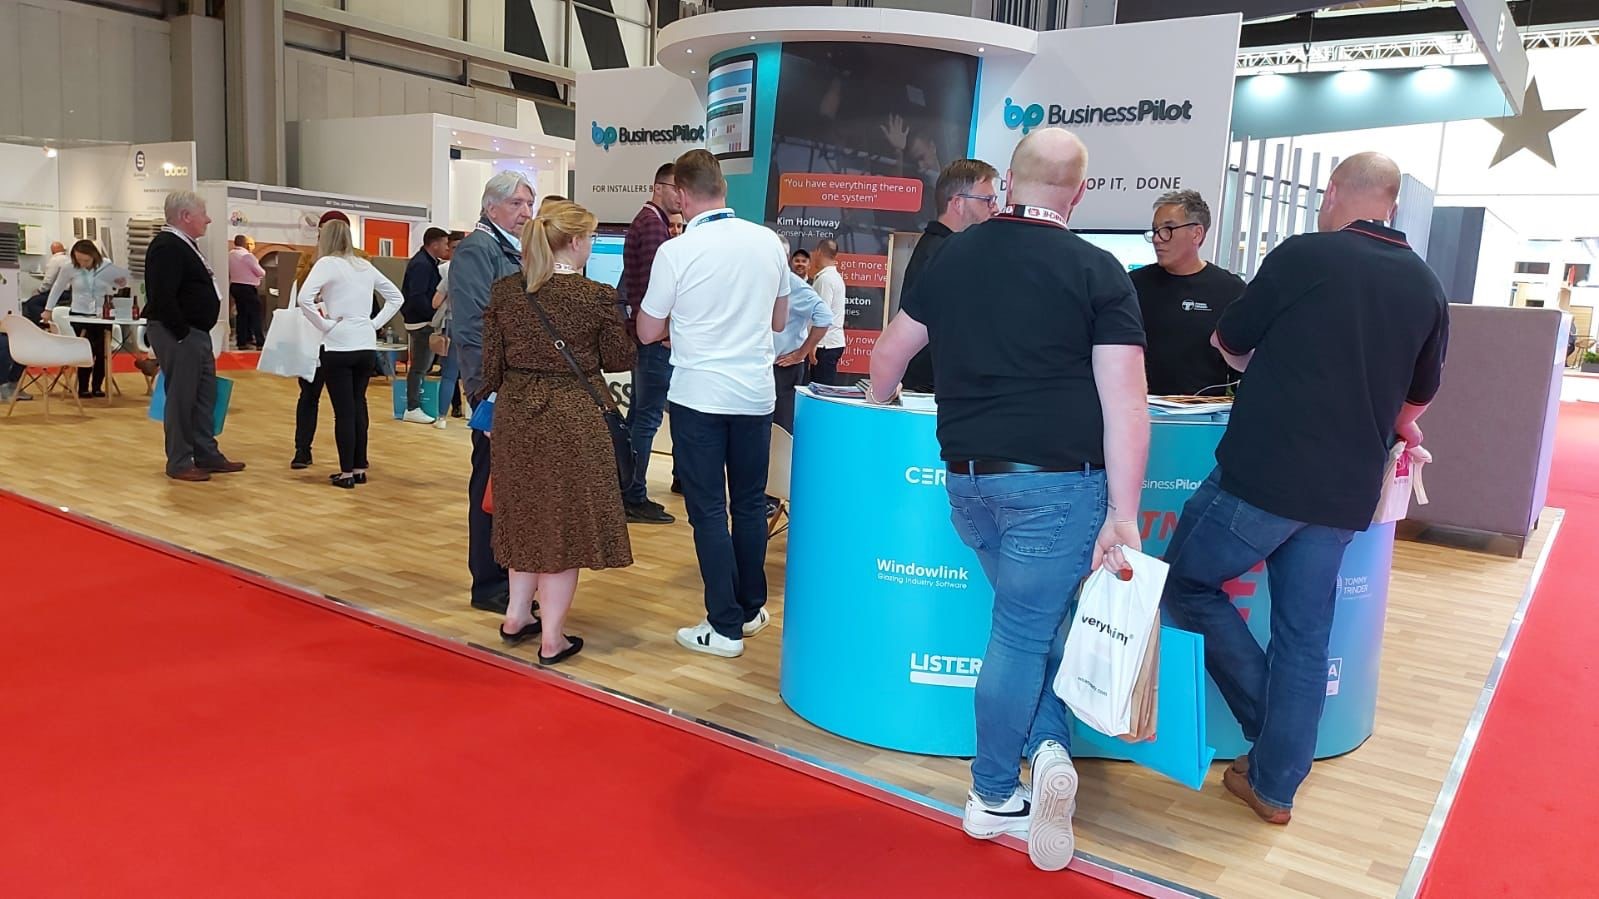 Busy Business Pilot Partner Zone at Fit Show 2022